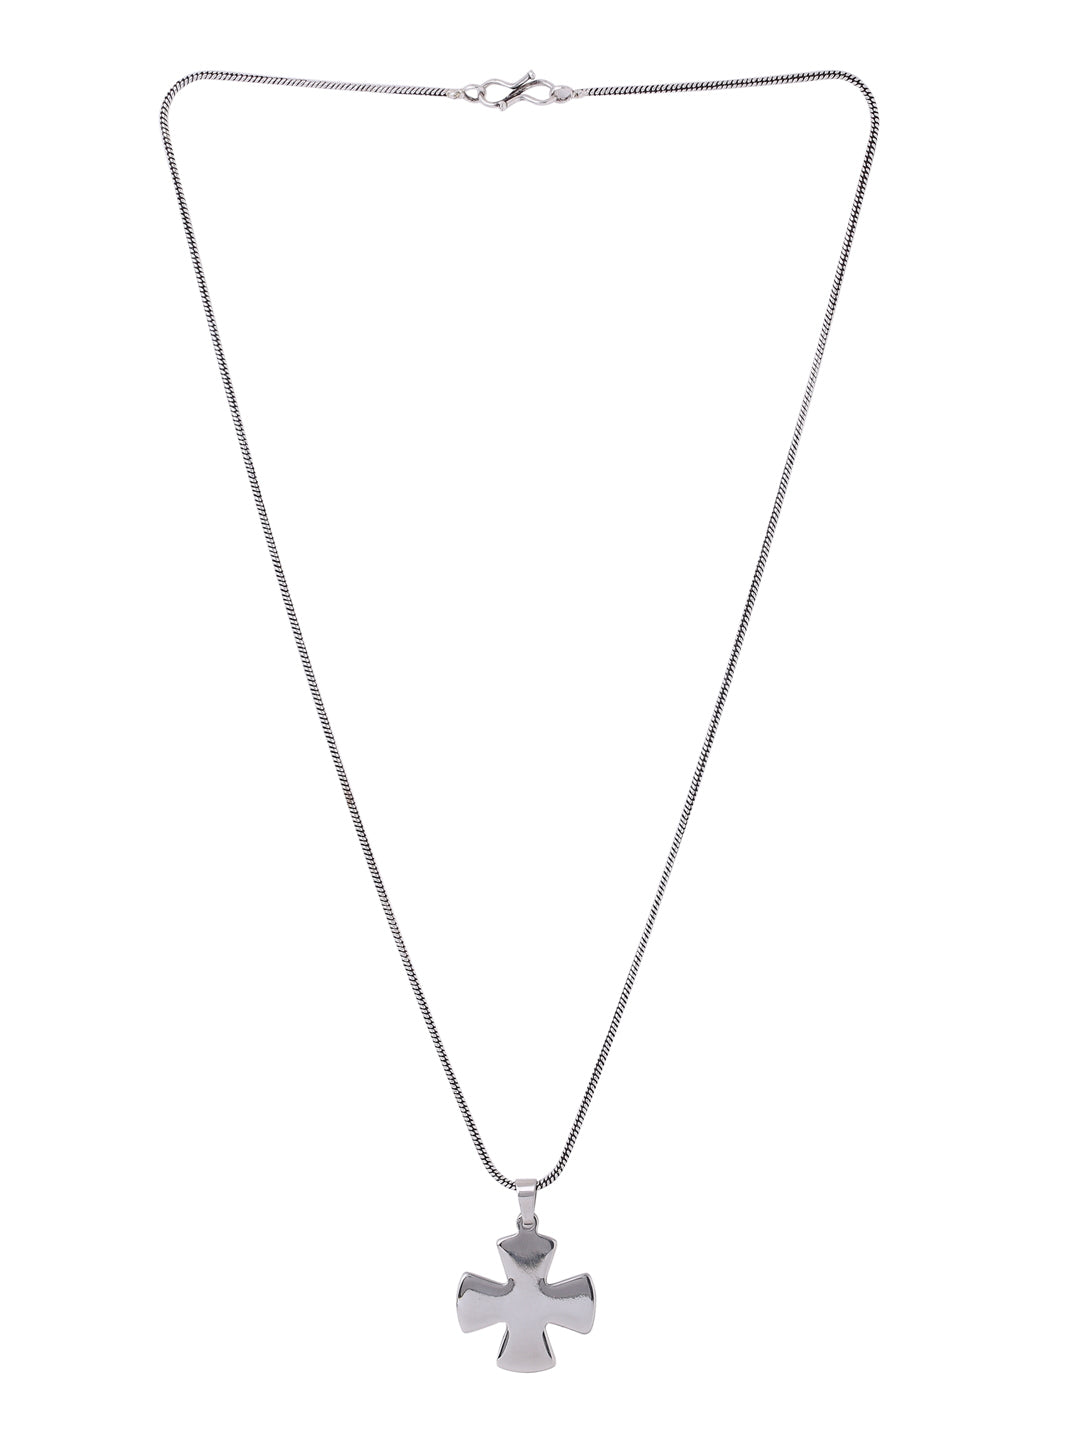 stainless-steel-holy-cross-pendant-with-chain-viraasi